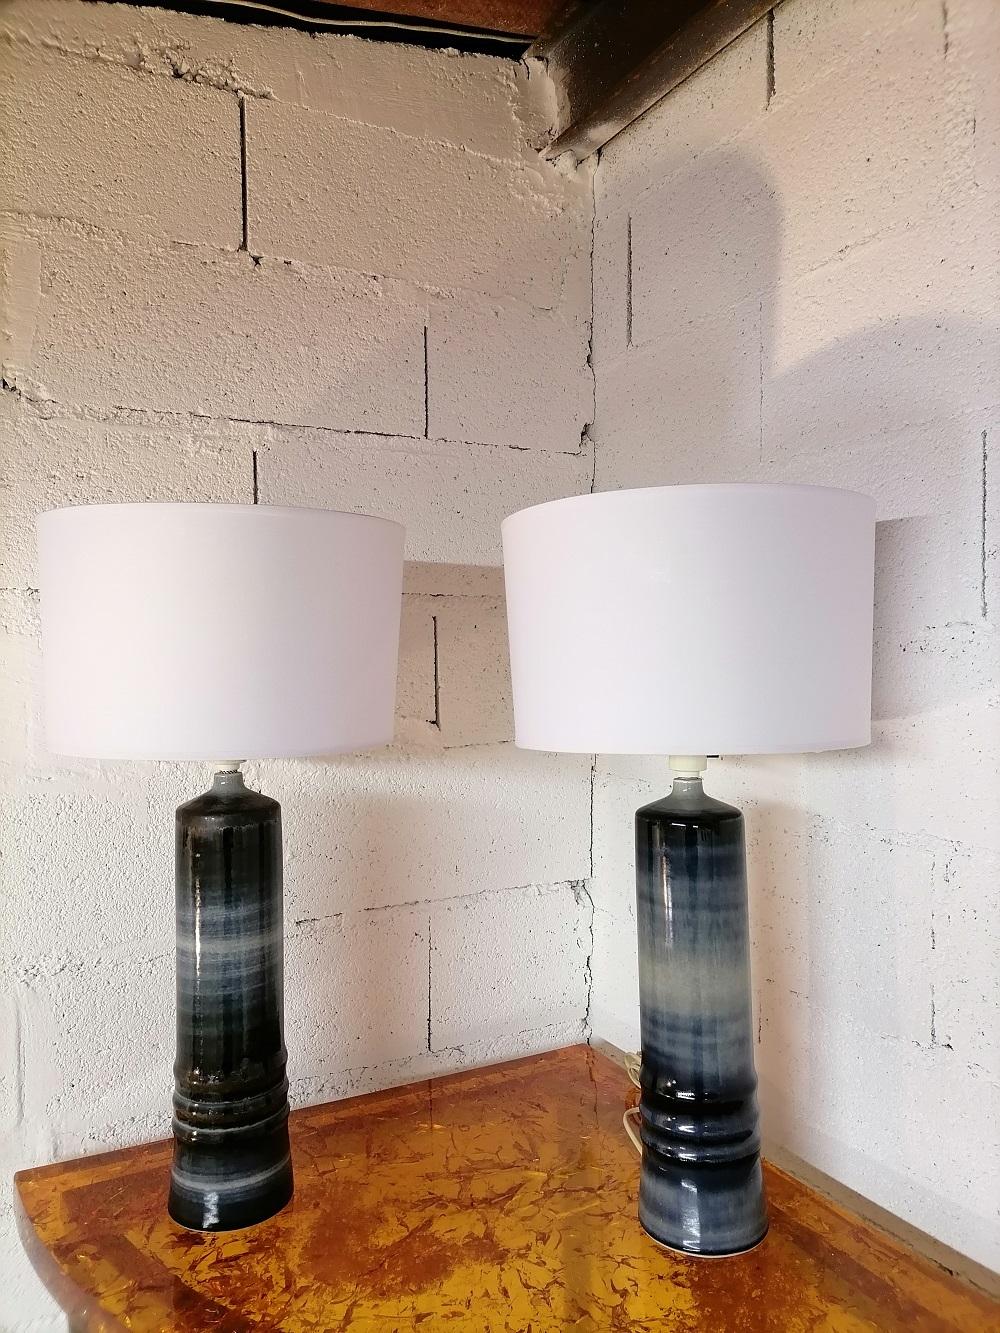 Olle Alberius Pair of Table Lamps Ceramic Rörstrand, Sweden, 1970

A rare pair of table lamps by the Sweden ceramist Olle Alberius

Large Scandinavian table lamps with blue glazed
